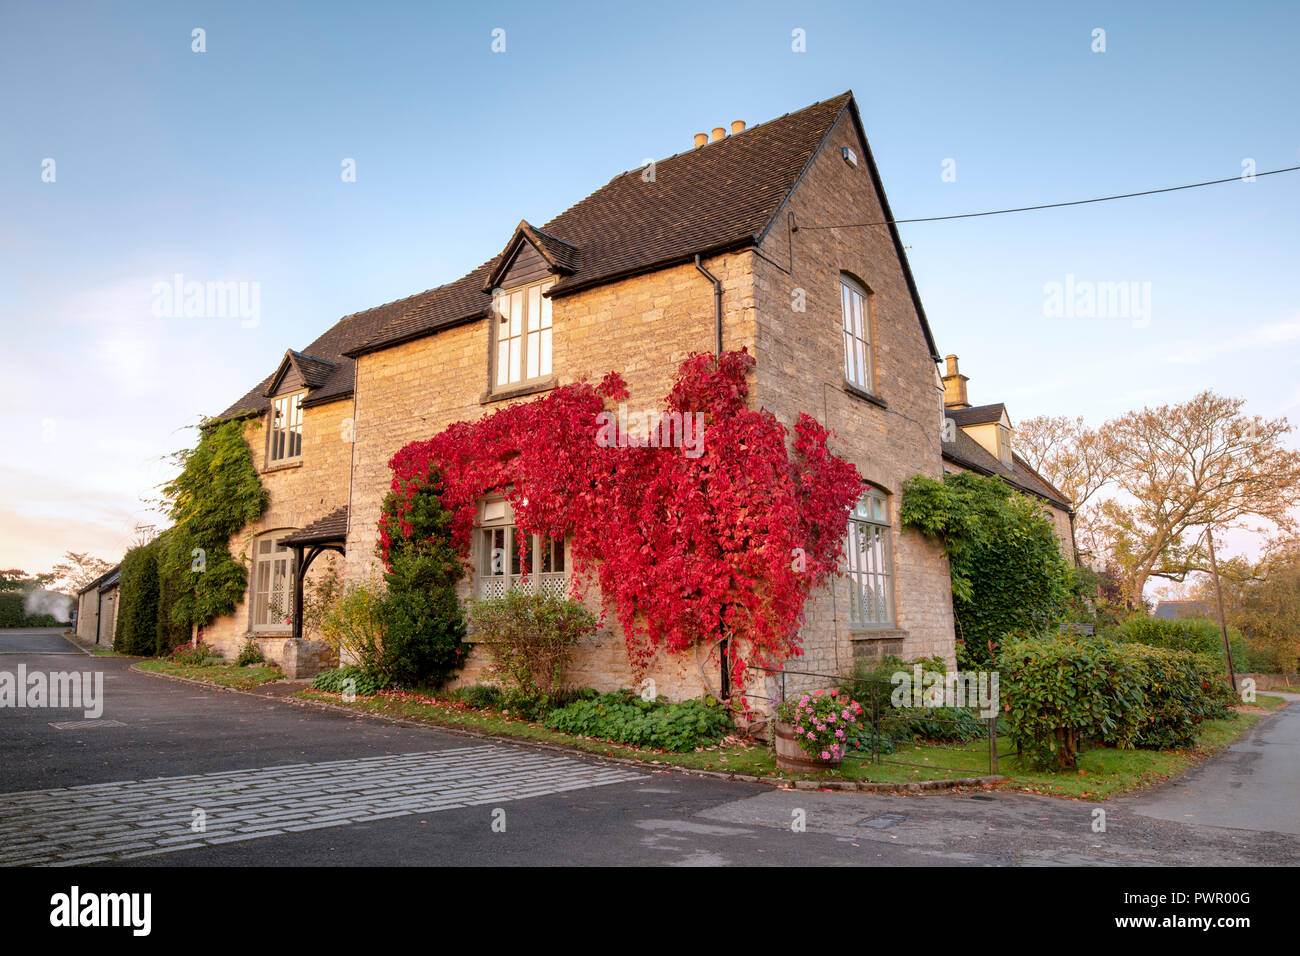 Parthenocissus quinquefolia.Virginia creeper / American ivy covering the walls of a house. Churchill, Cotswolds, Oxfordshire, England Stock Photo